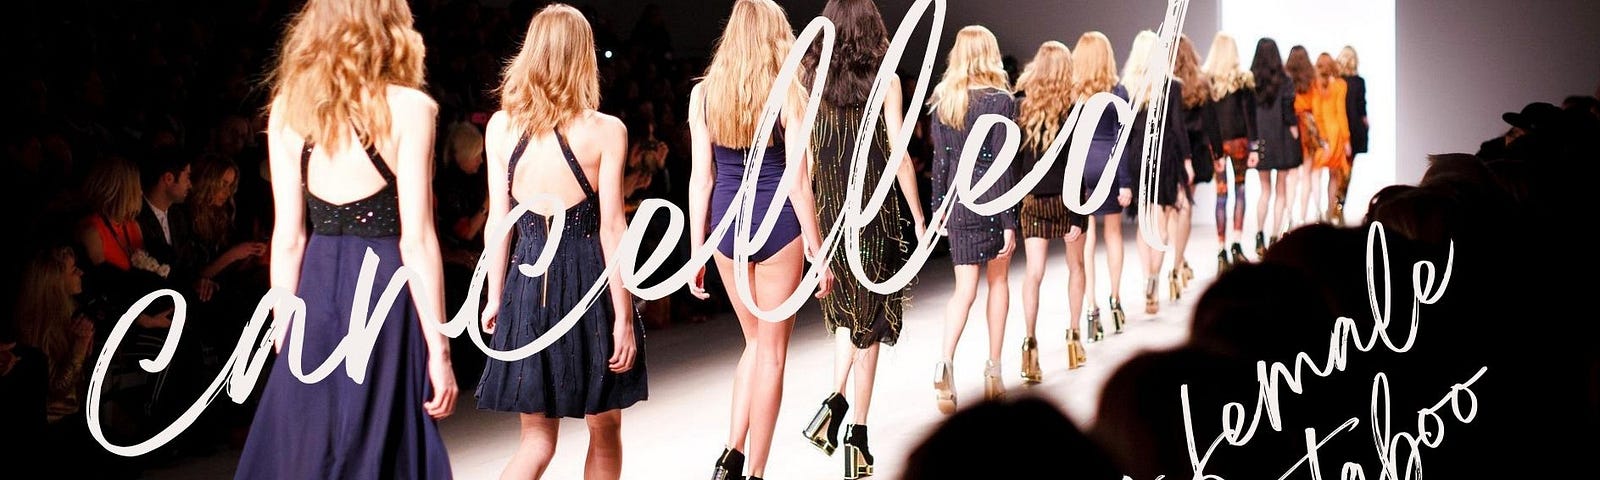 The back view of a row of female models in various attire leaving an illuminated catwalk. The word ‘cancelled’ overlays the models and the words, ‘being female is taboo’, is written in the bottom right-hand corner.